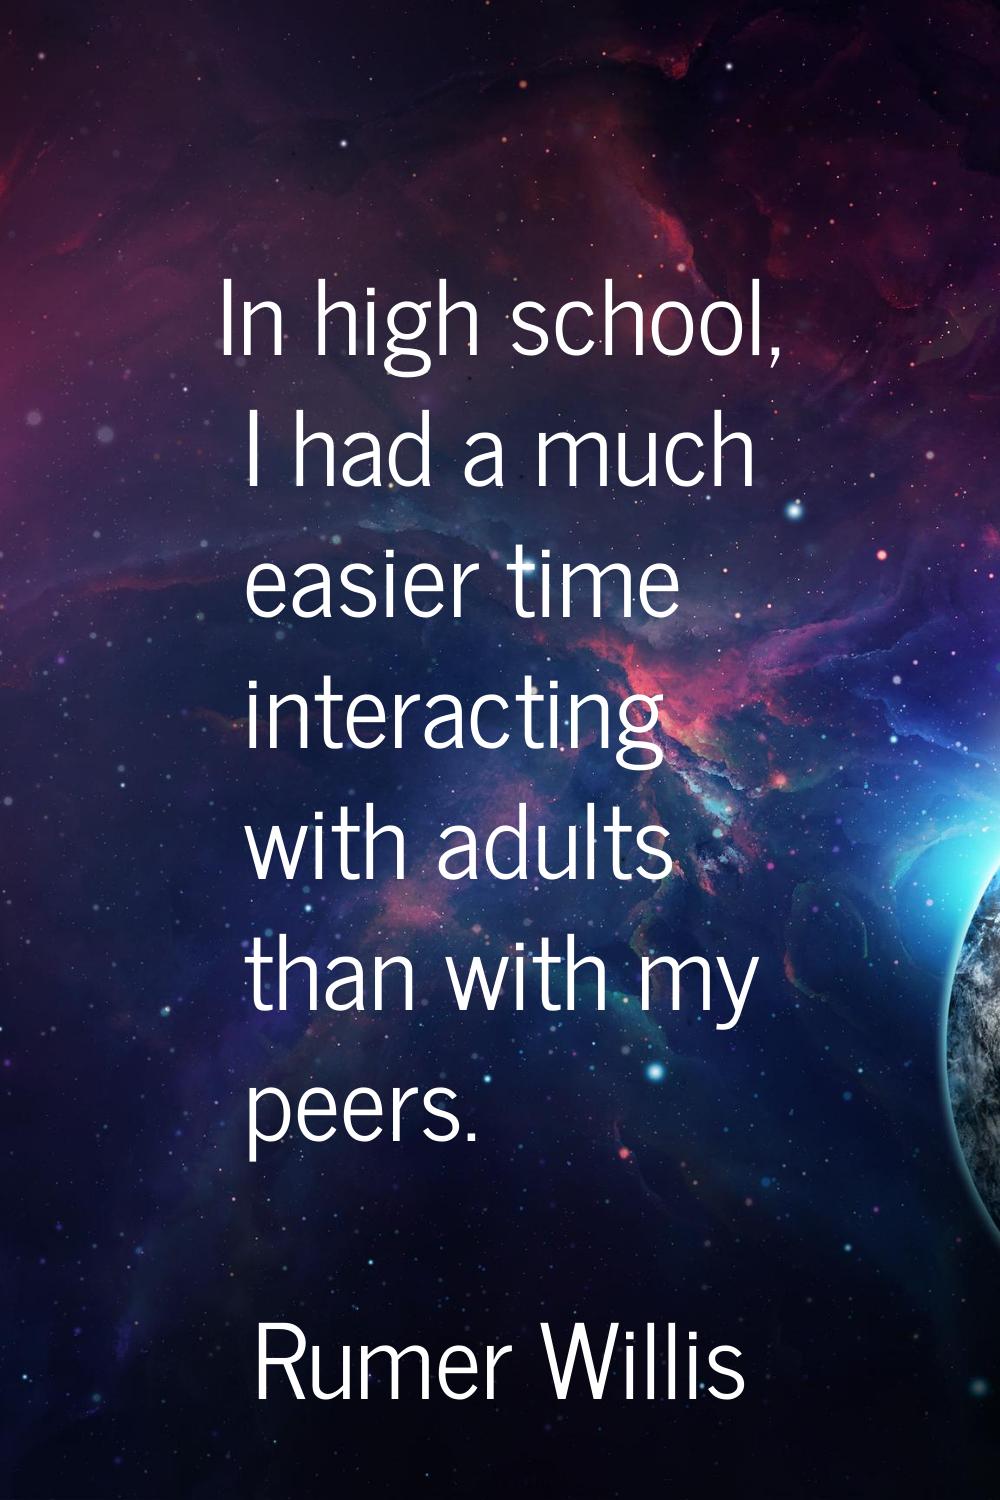 In high school, I had a much easier time interacting with adults than with my peers.